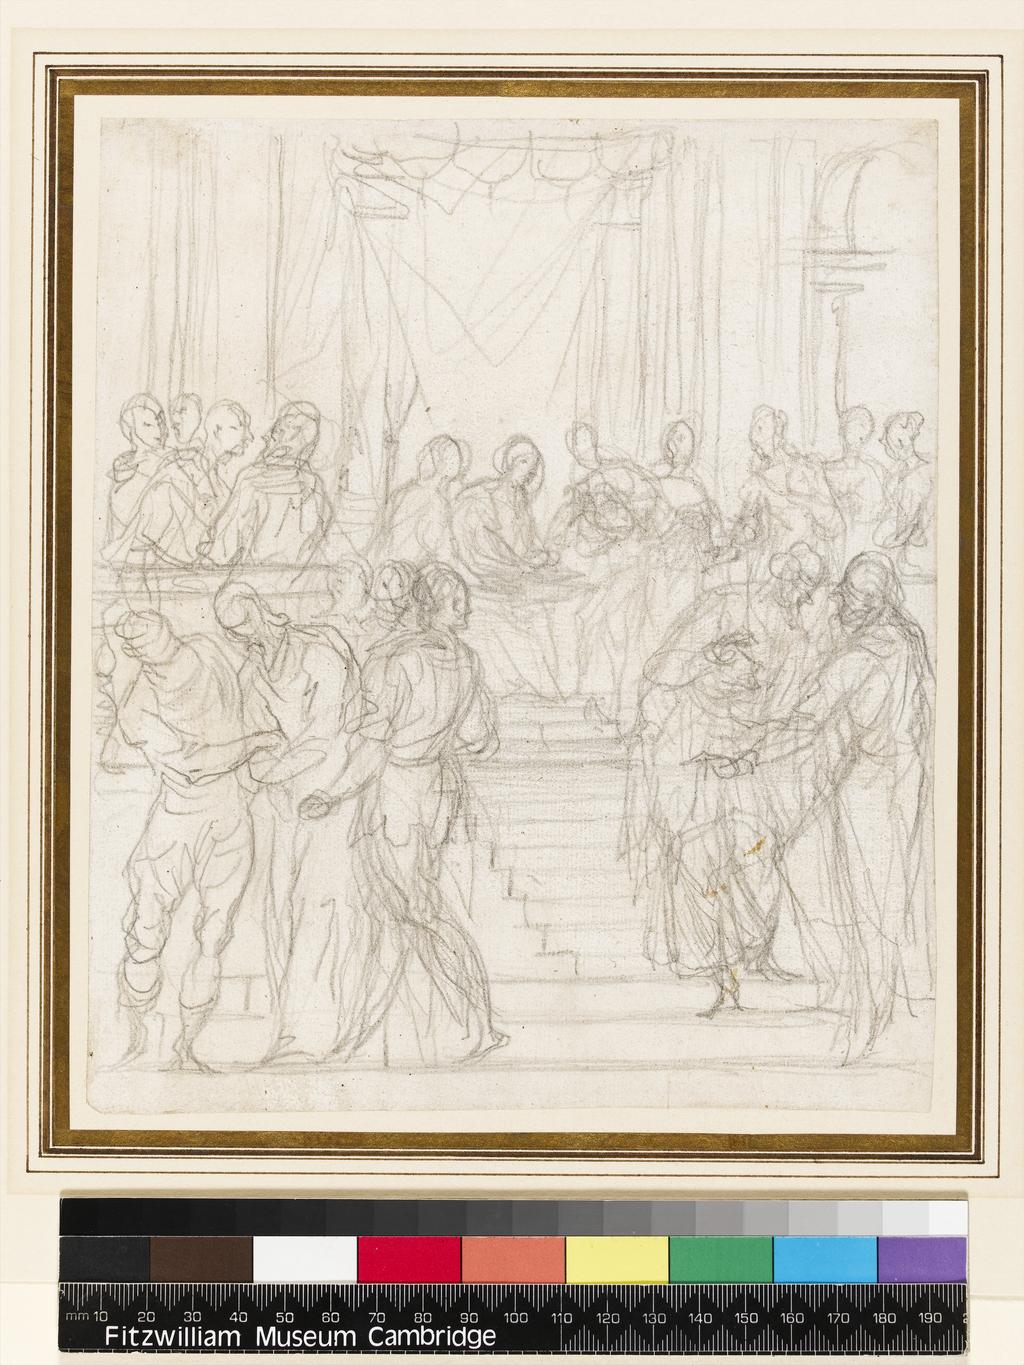 An image of Christ before Pilate. Maganza, Alessandro (Italian, 1556-p.1630). Black chalk (graphite?) on paper, height 216 mm, width 184 mm. Production Notes: study for altarpiece in Vienza?